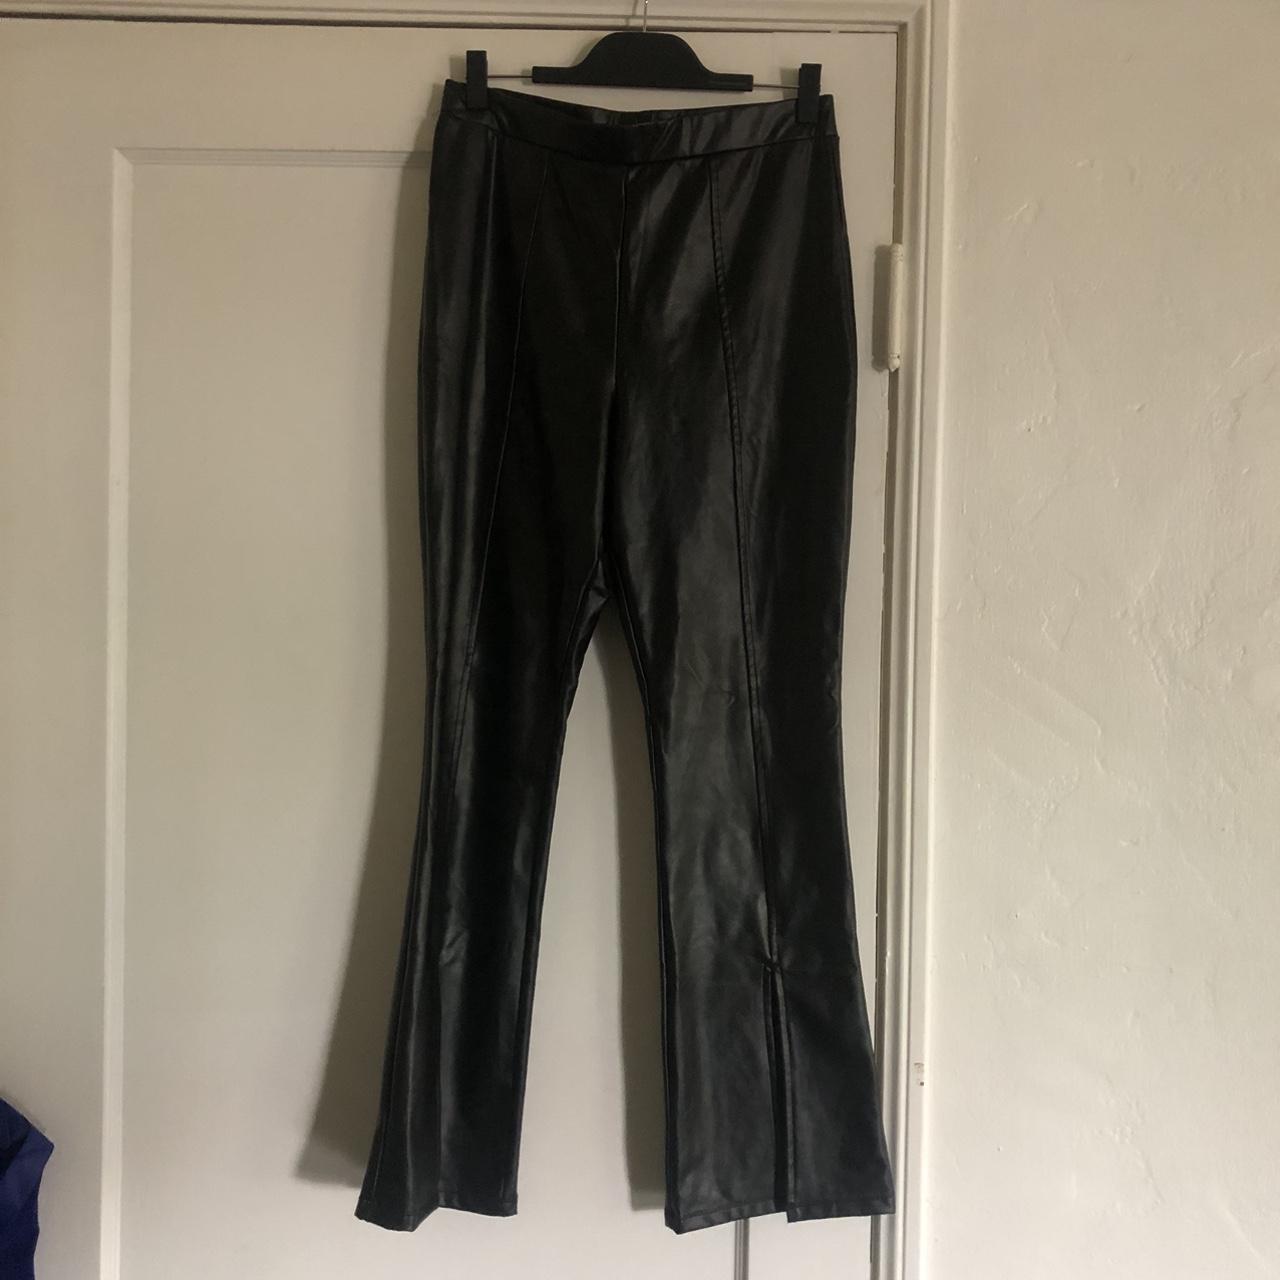 Faux leather pants open slit at the bottom - Depop